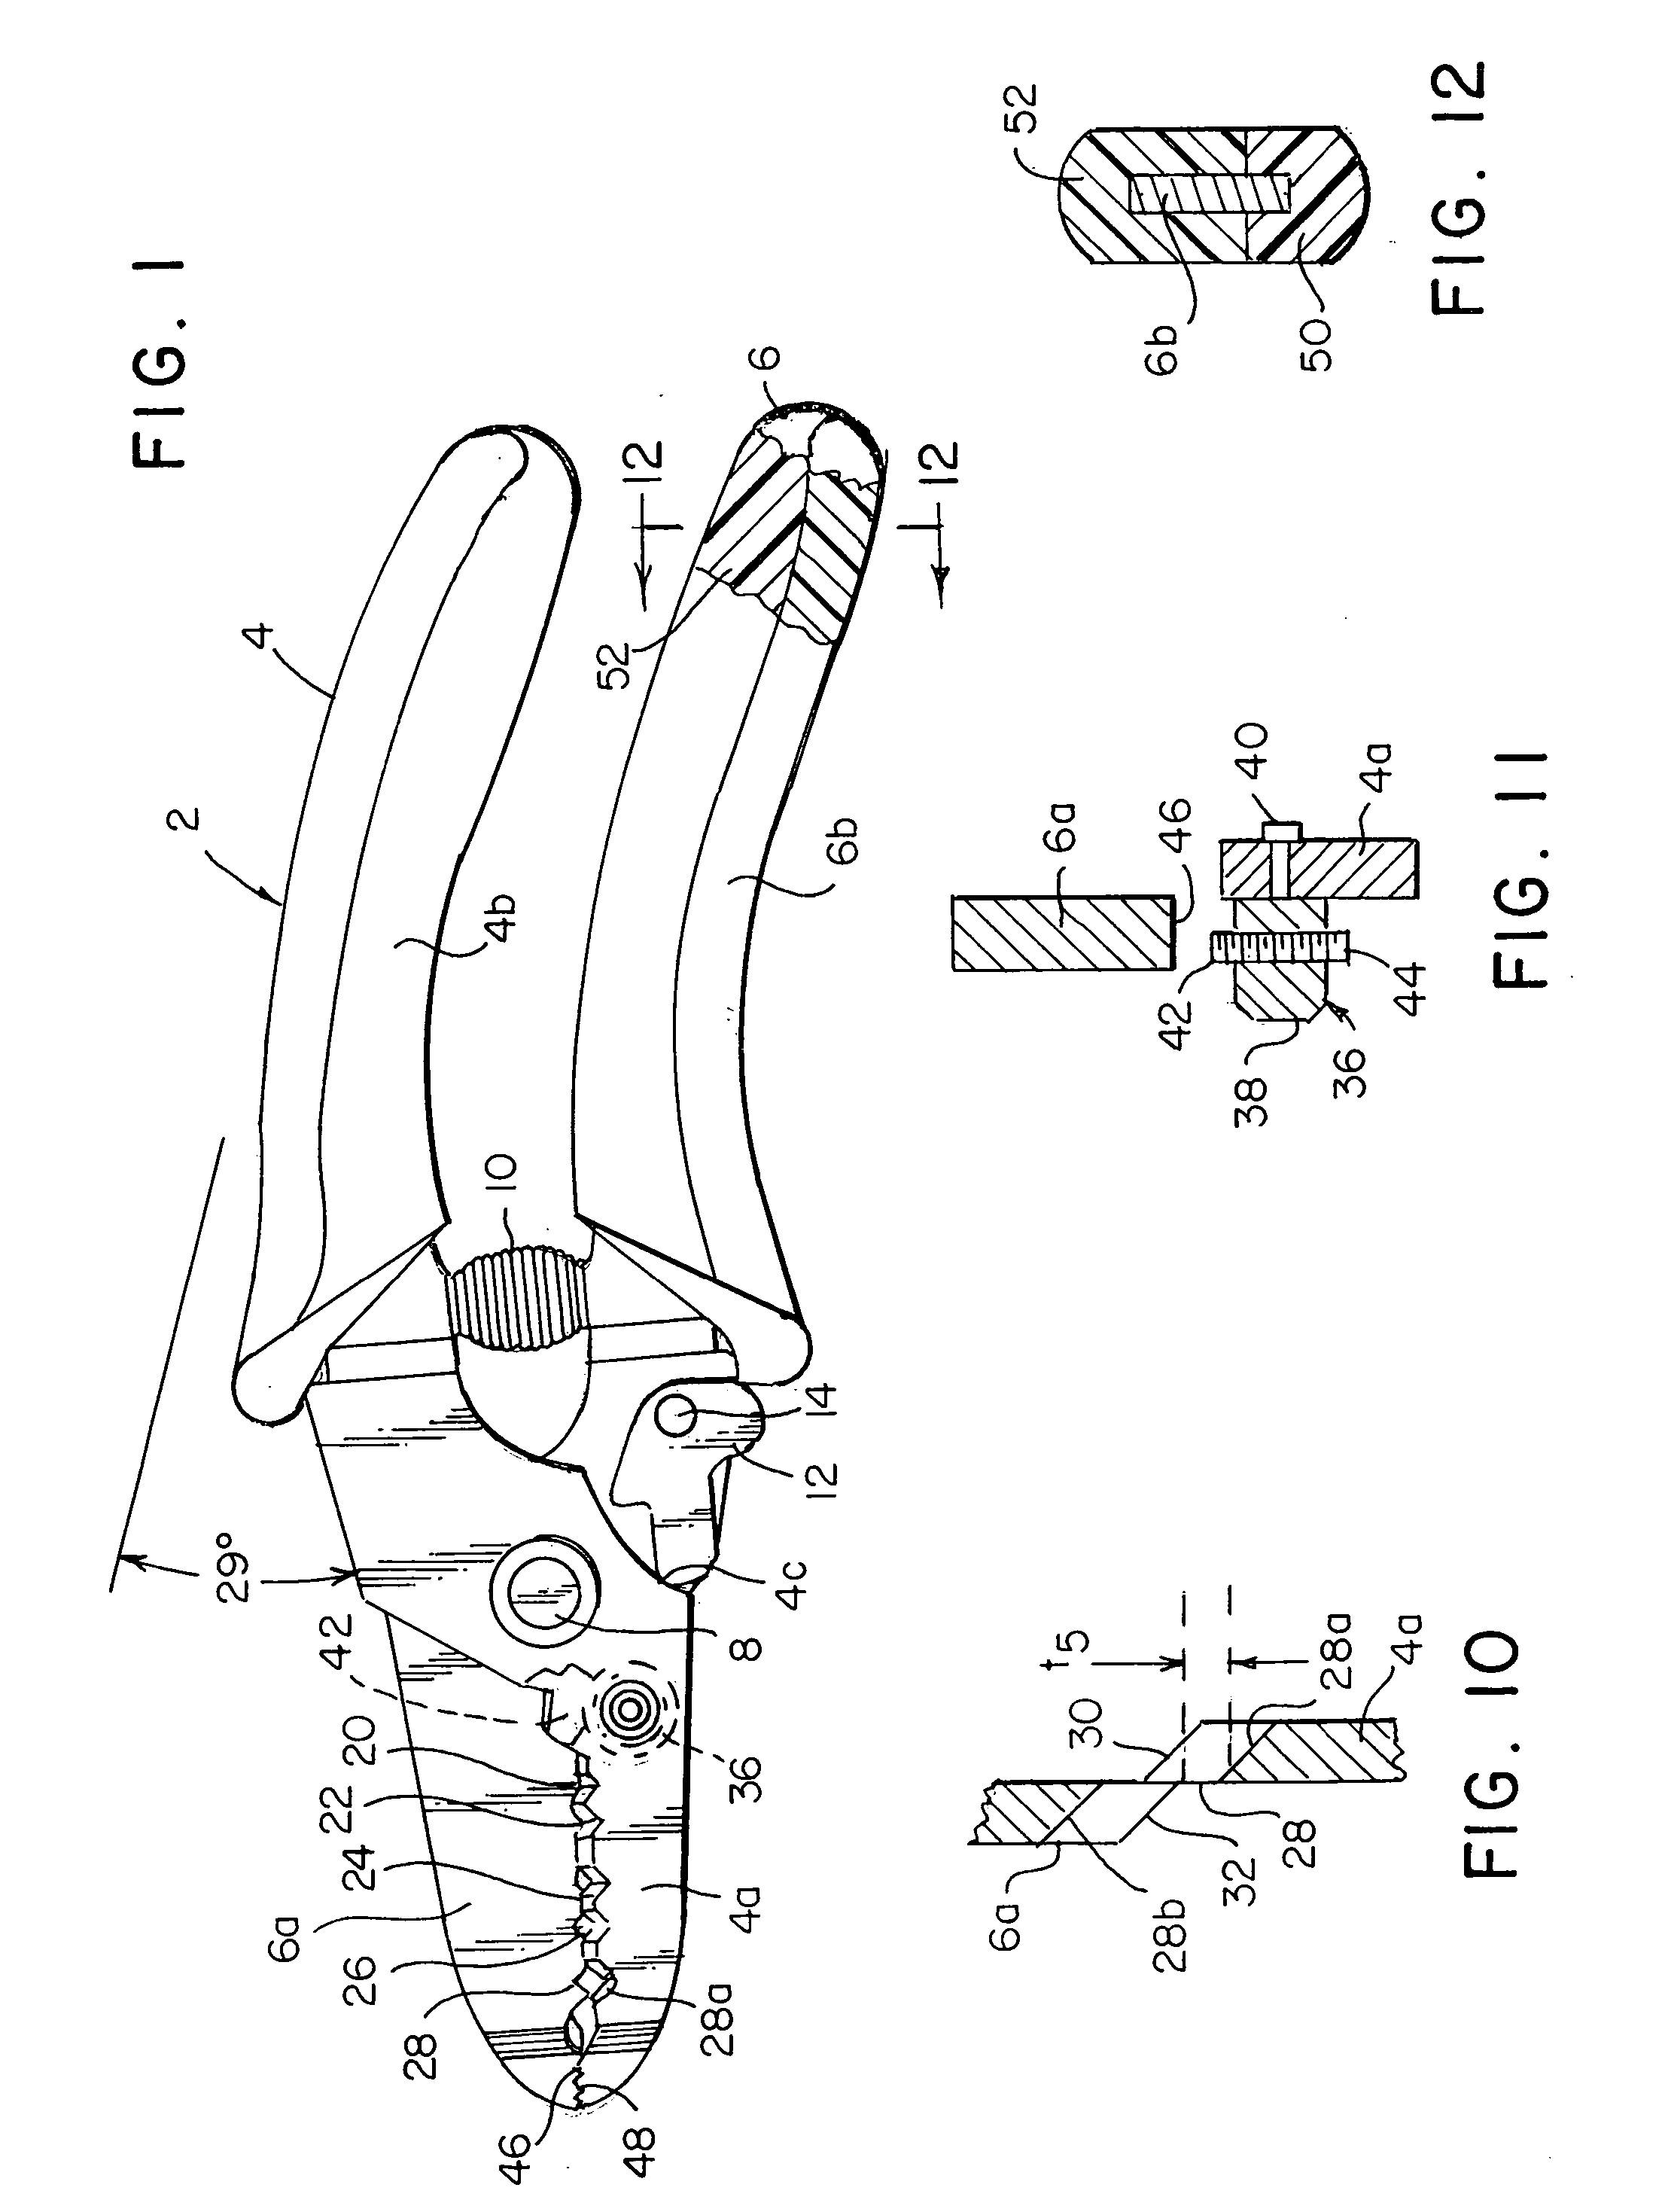 Stripping tool for fiber optic cables